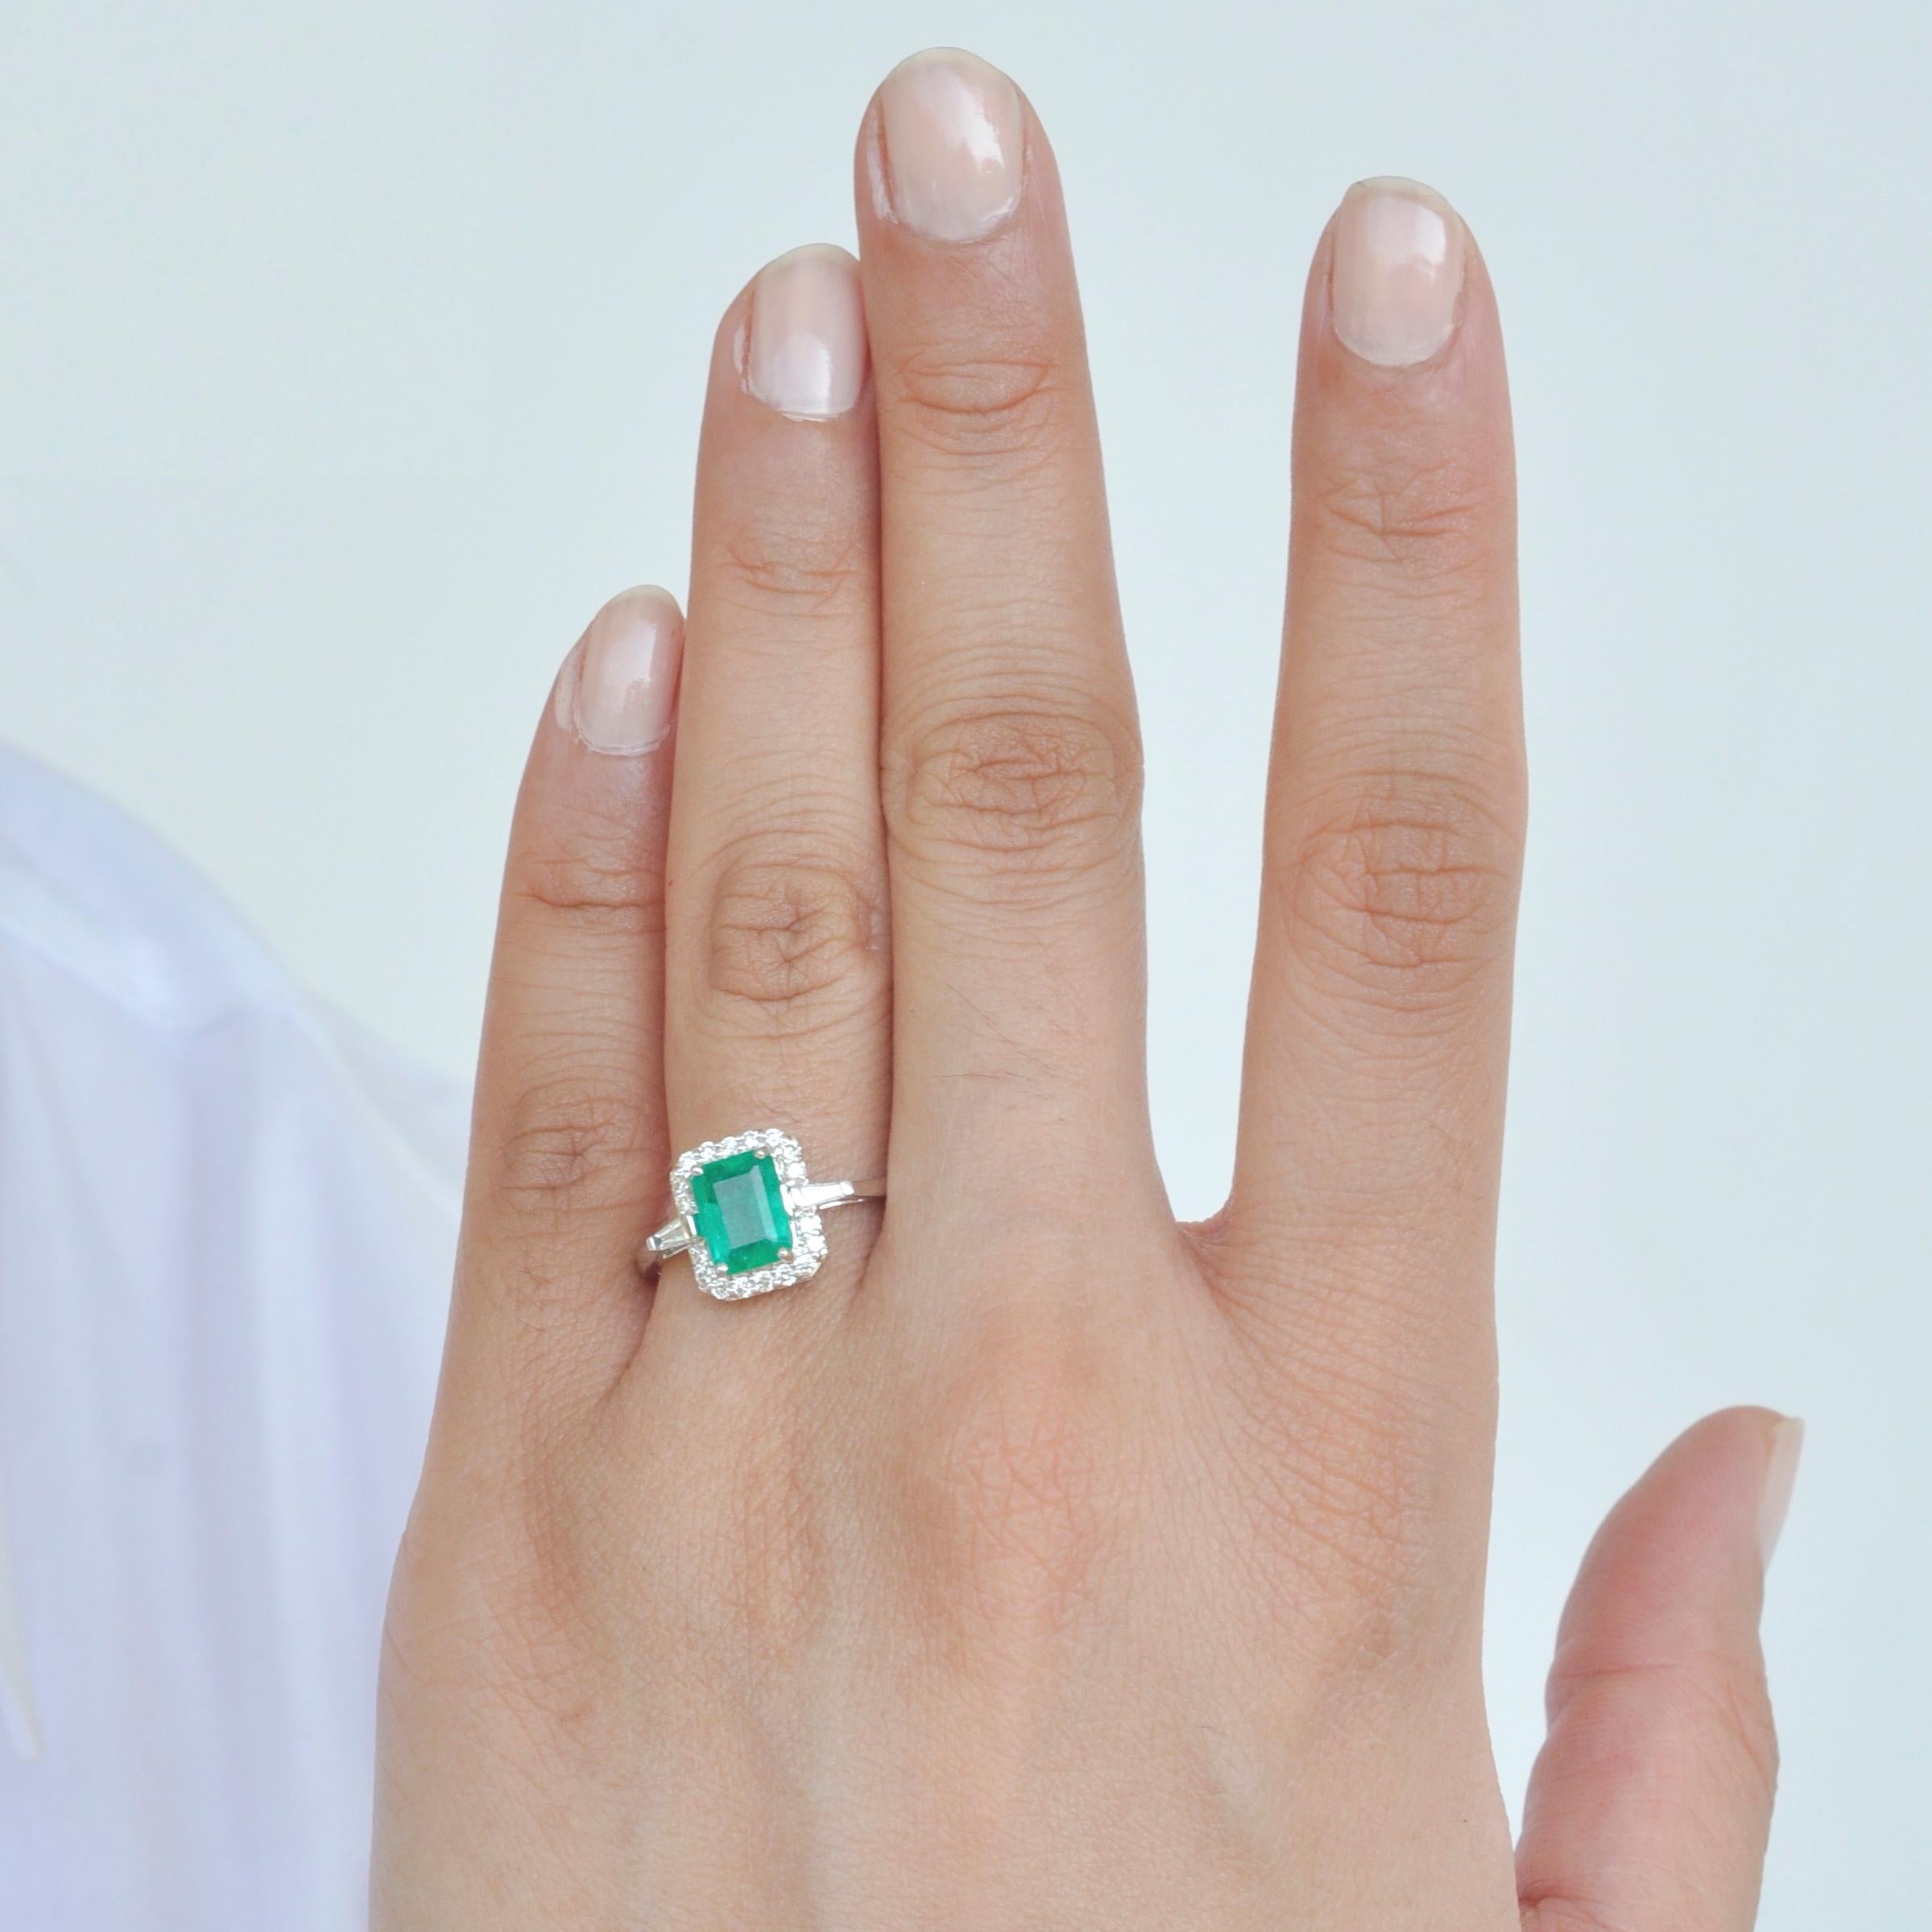 18 karat white gold emerald cut 8 x 6 mm colombian emerald diamond contemporary ring suitable for bridal and engagement occasions. 
This emerald diamond ring personifies simplicity and elegance. Encircling the Colombian emerald are brilliant cut